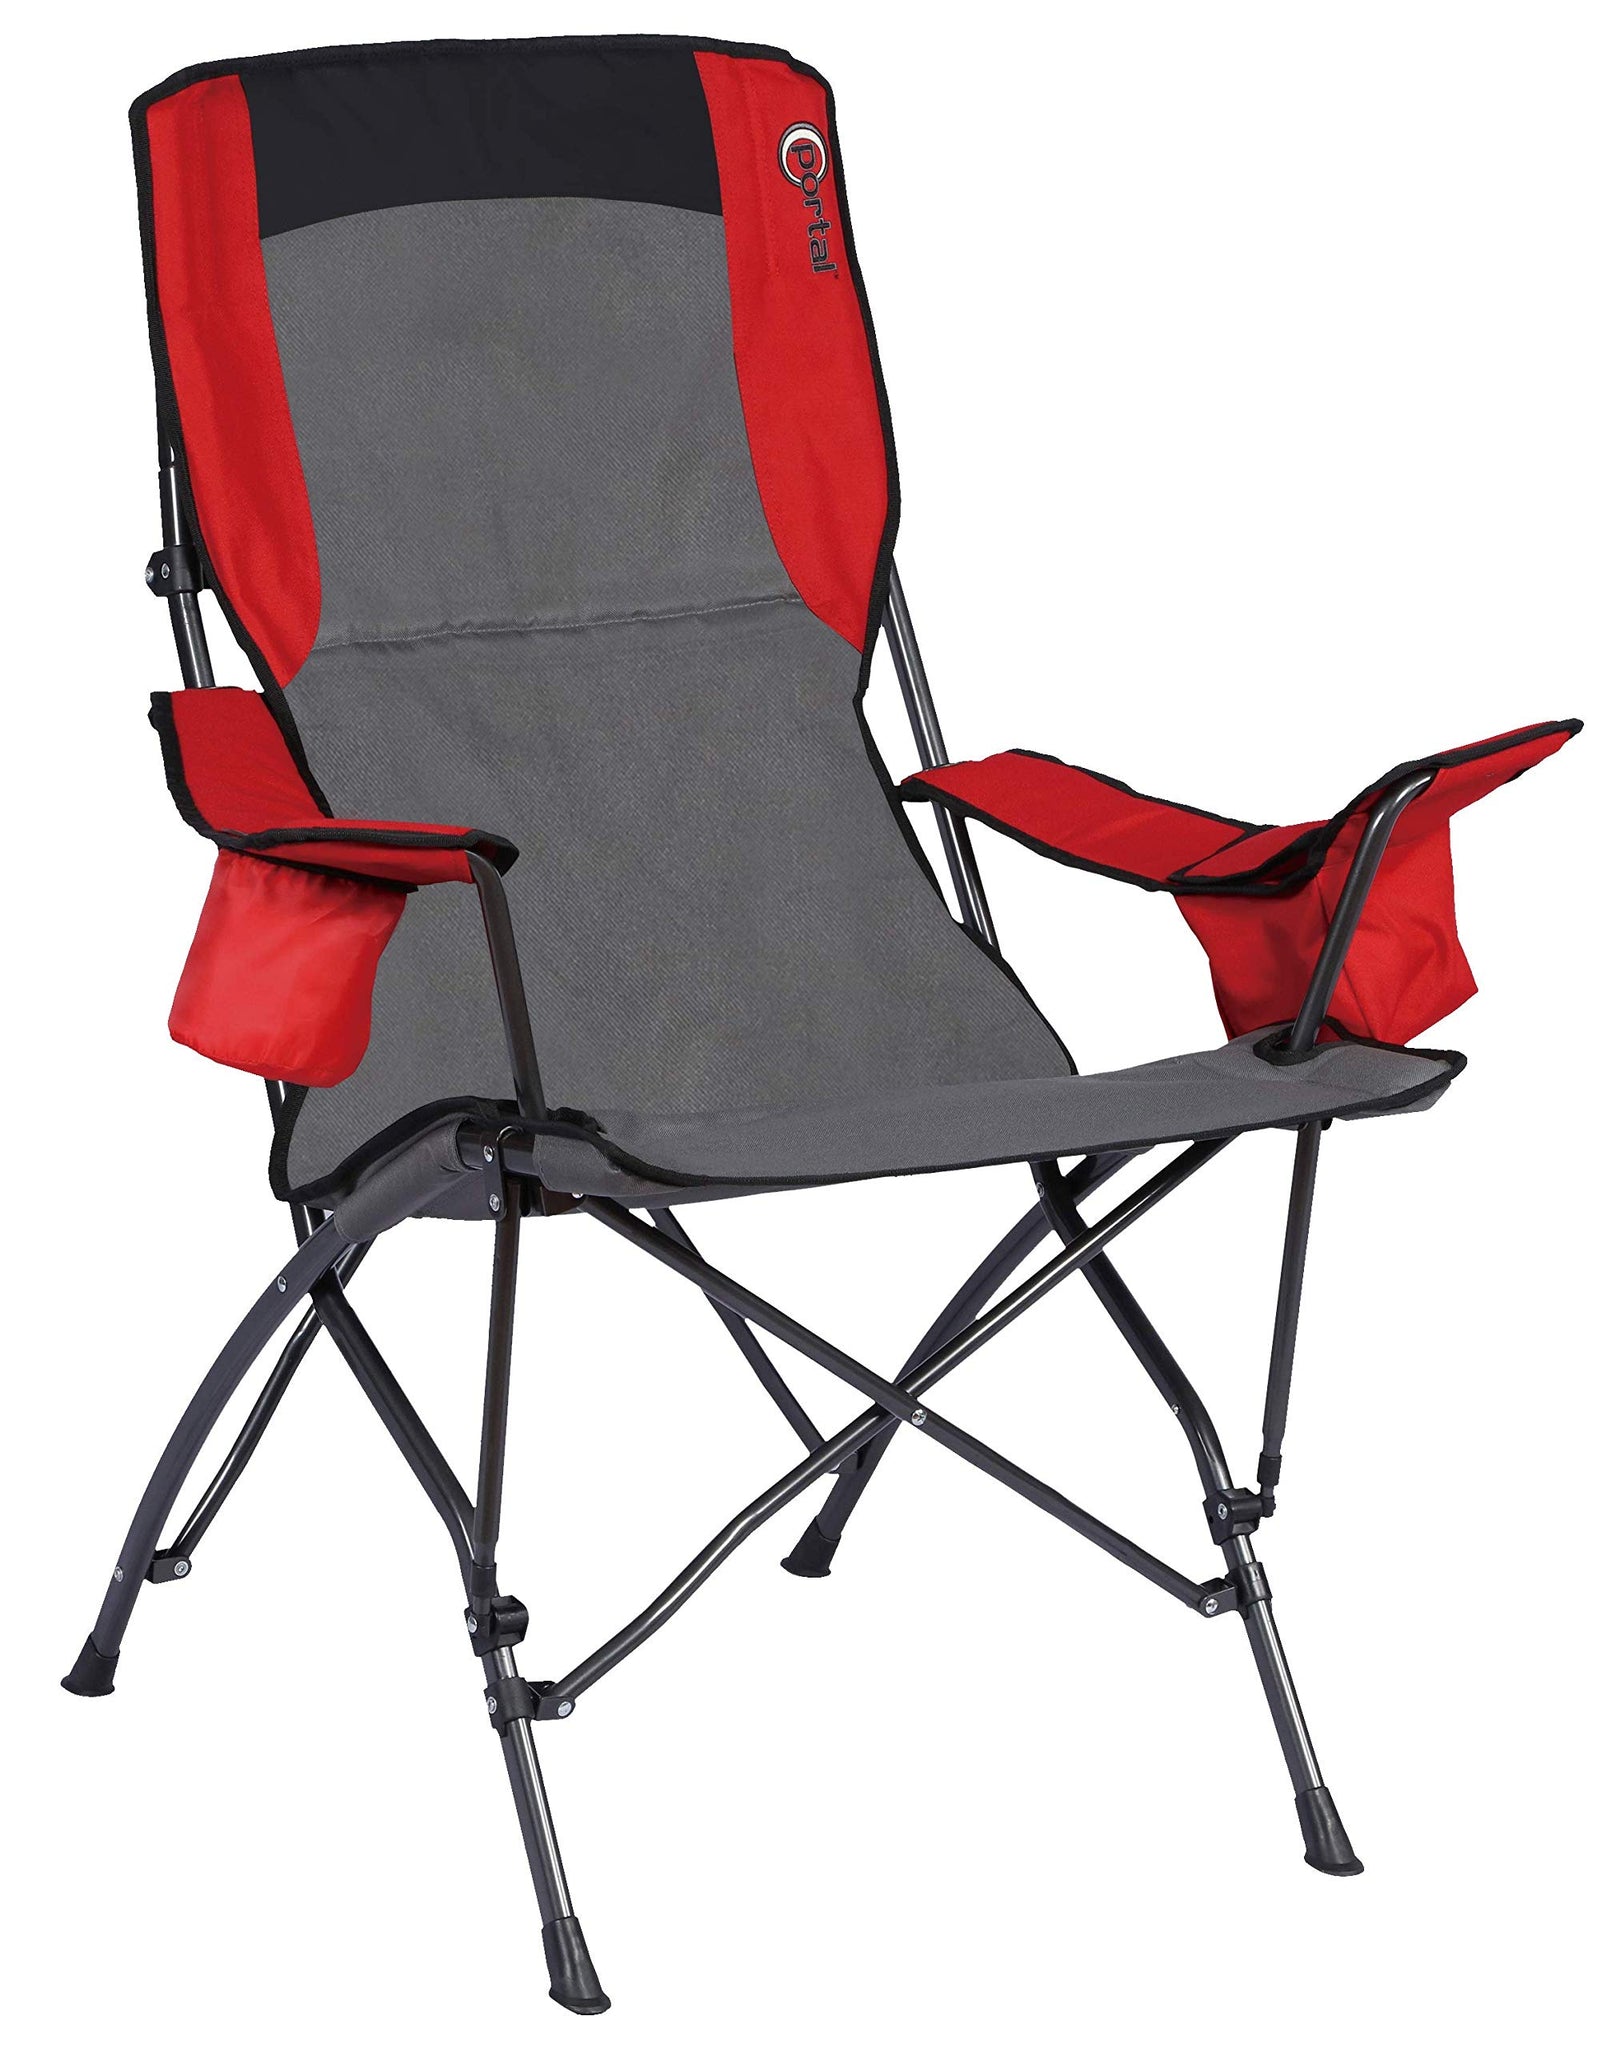 PORTAL Camping Chair Folding Portable Chairs with Cup Holder and Carry Bag, Support 300lbs